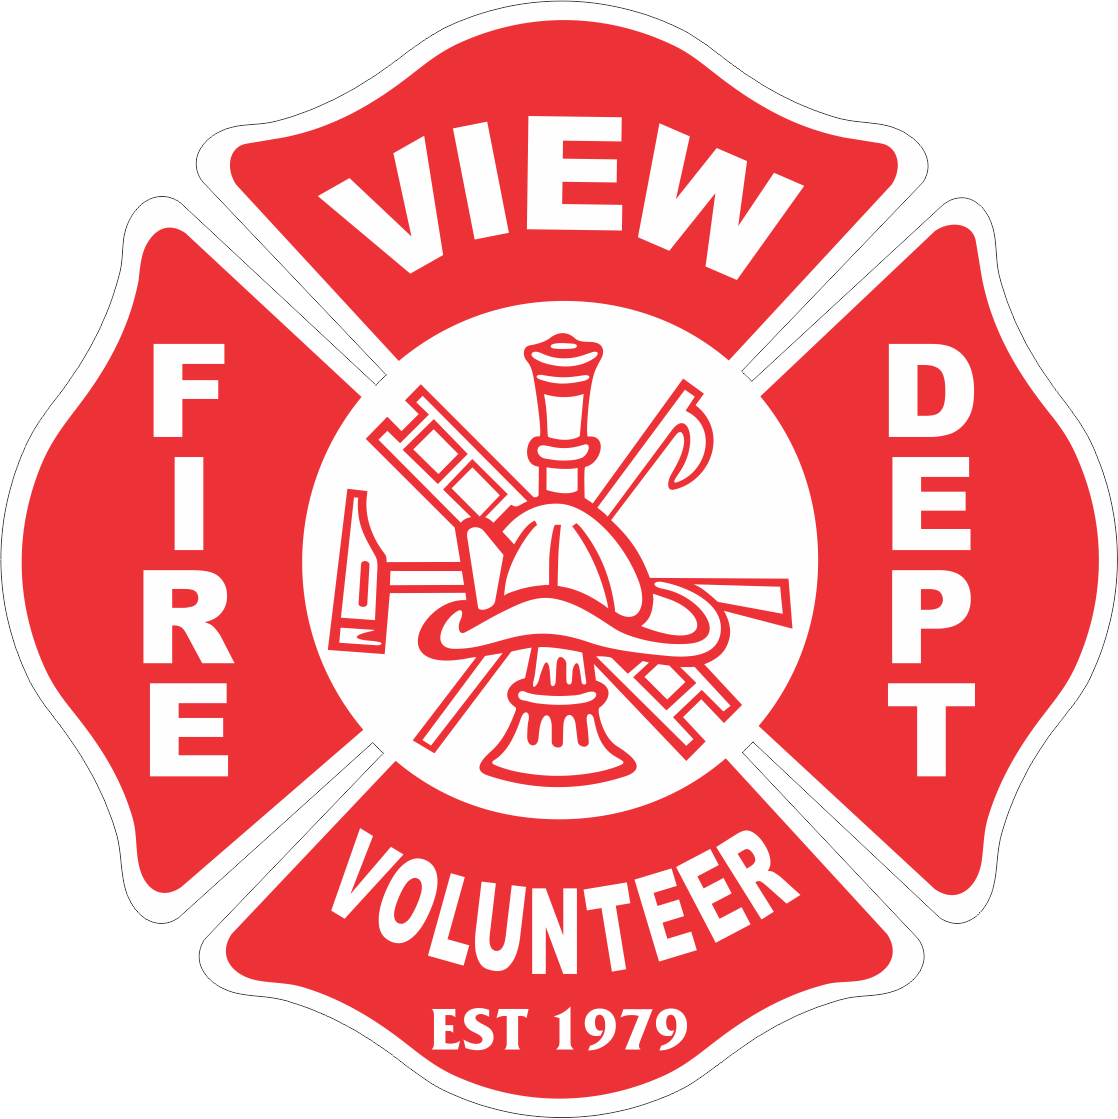 Volunteering clipart logo. Fire rescue pencil and